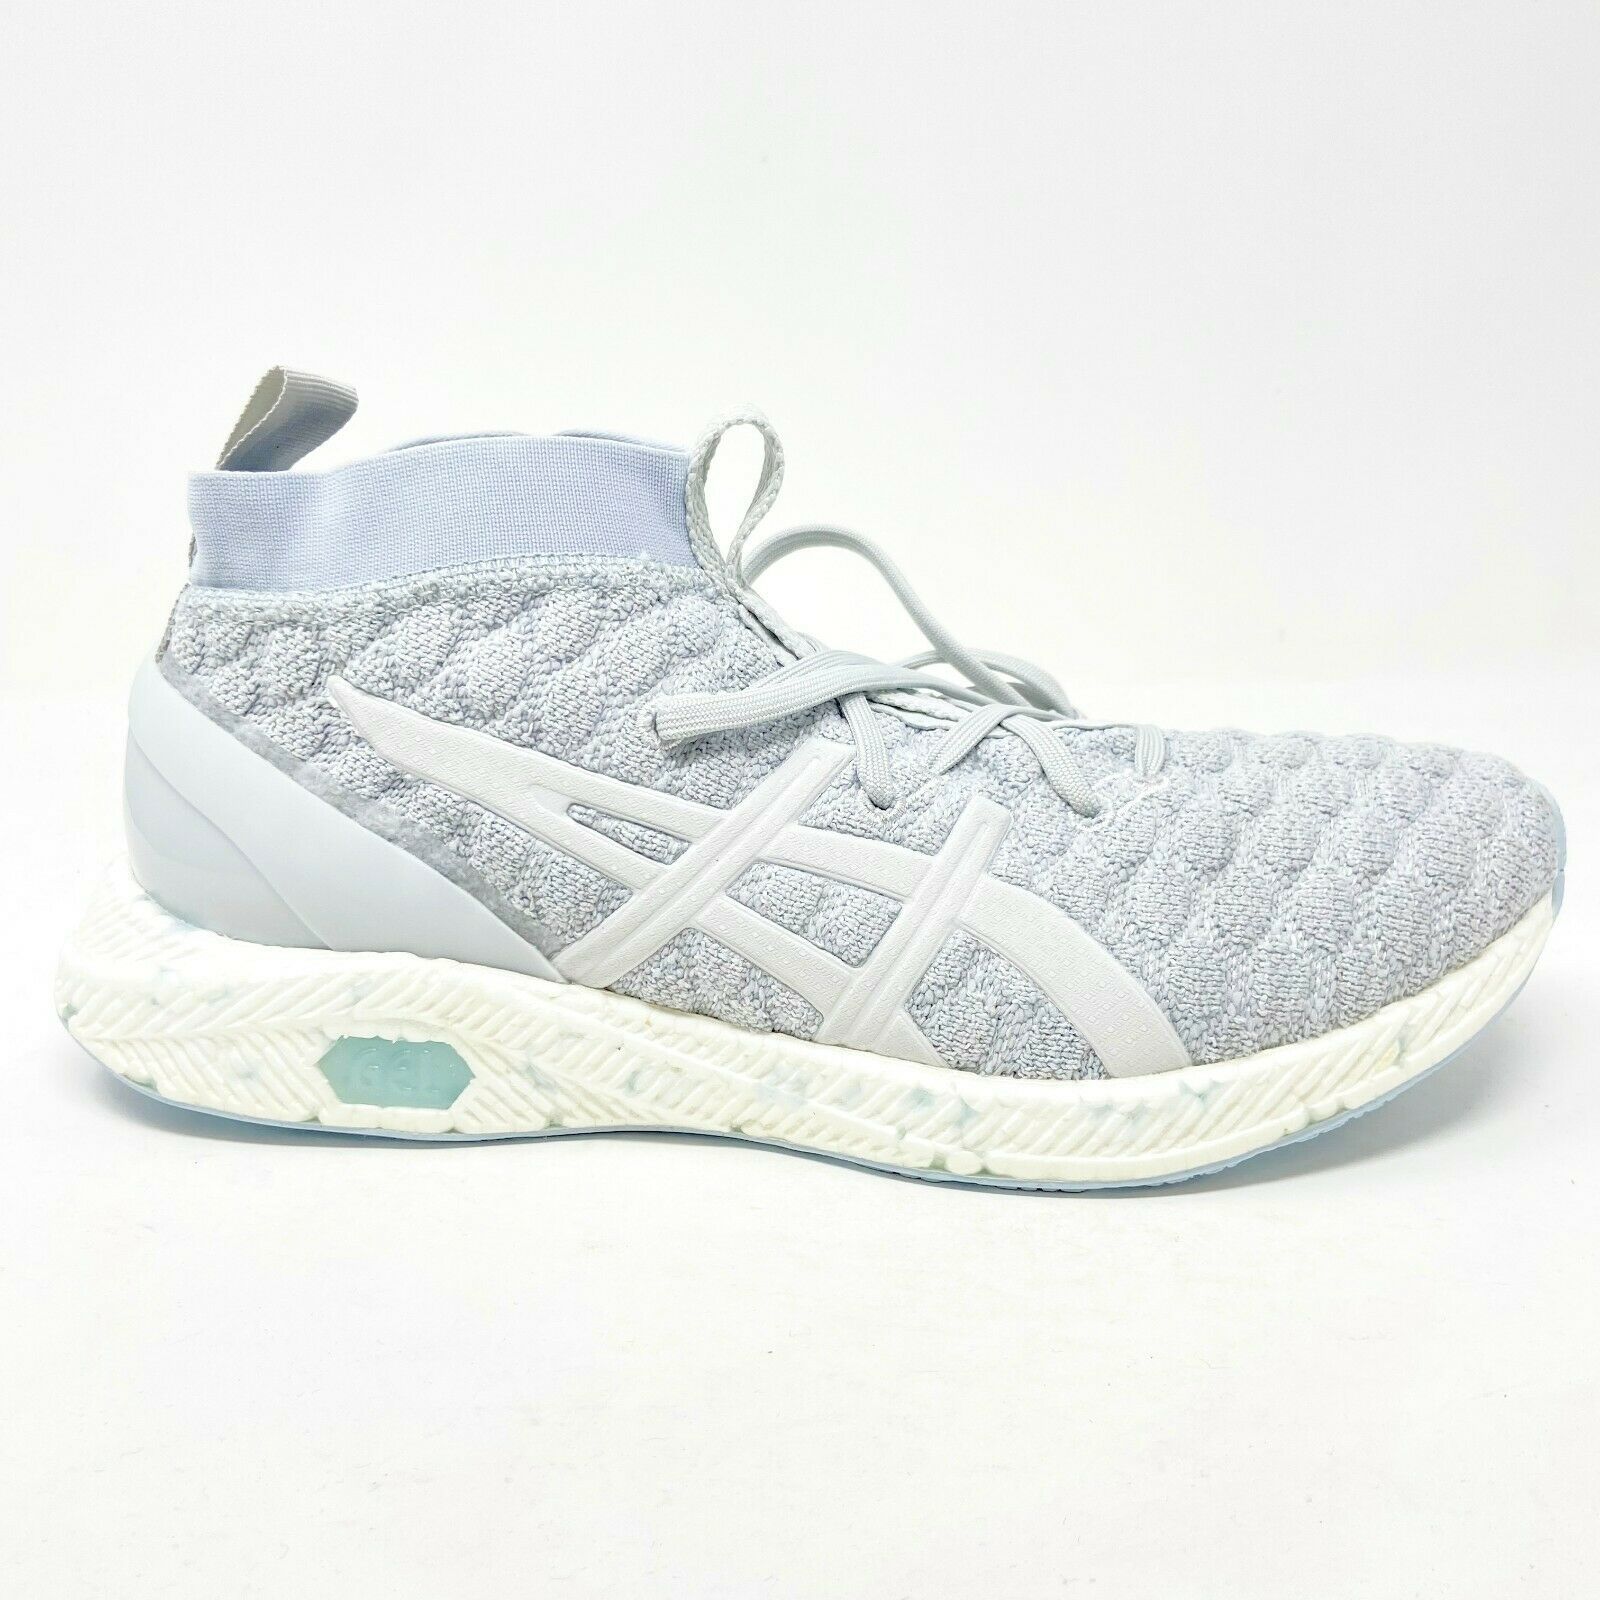 Asics HyperGel-Kan Glacier Grey Womens Mid Running Shoes 1022A032 020